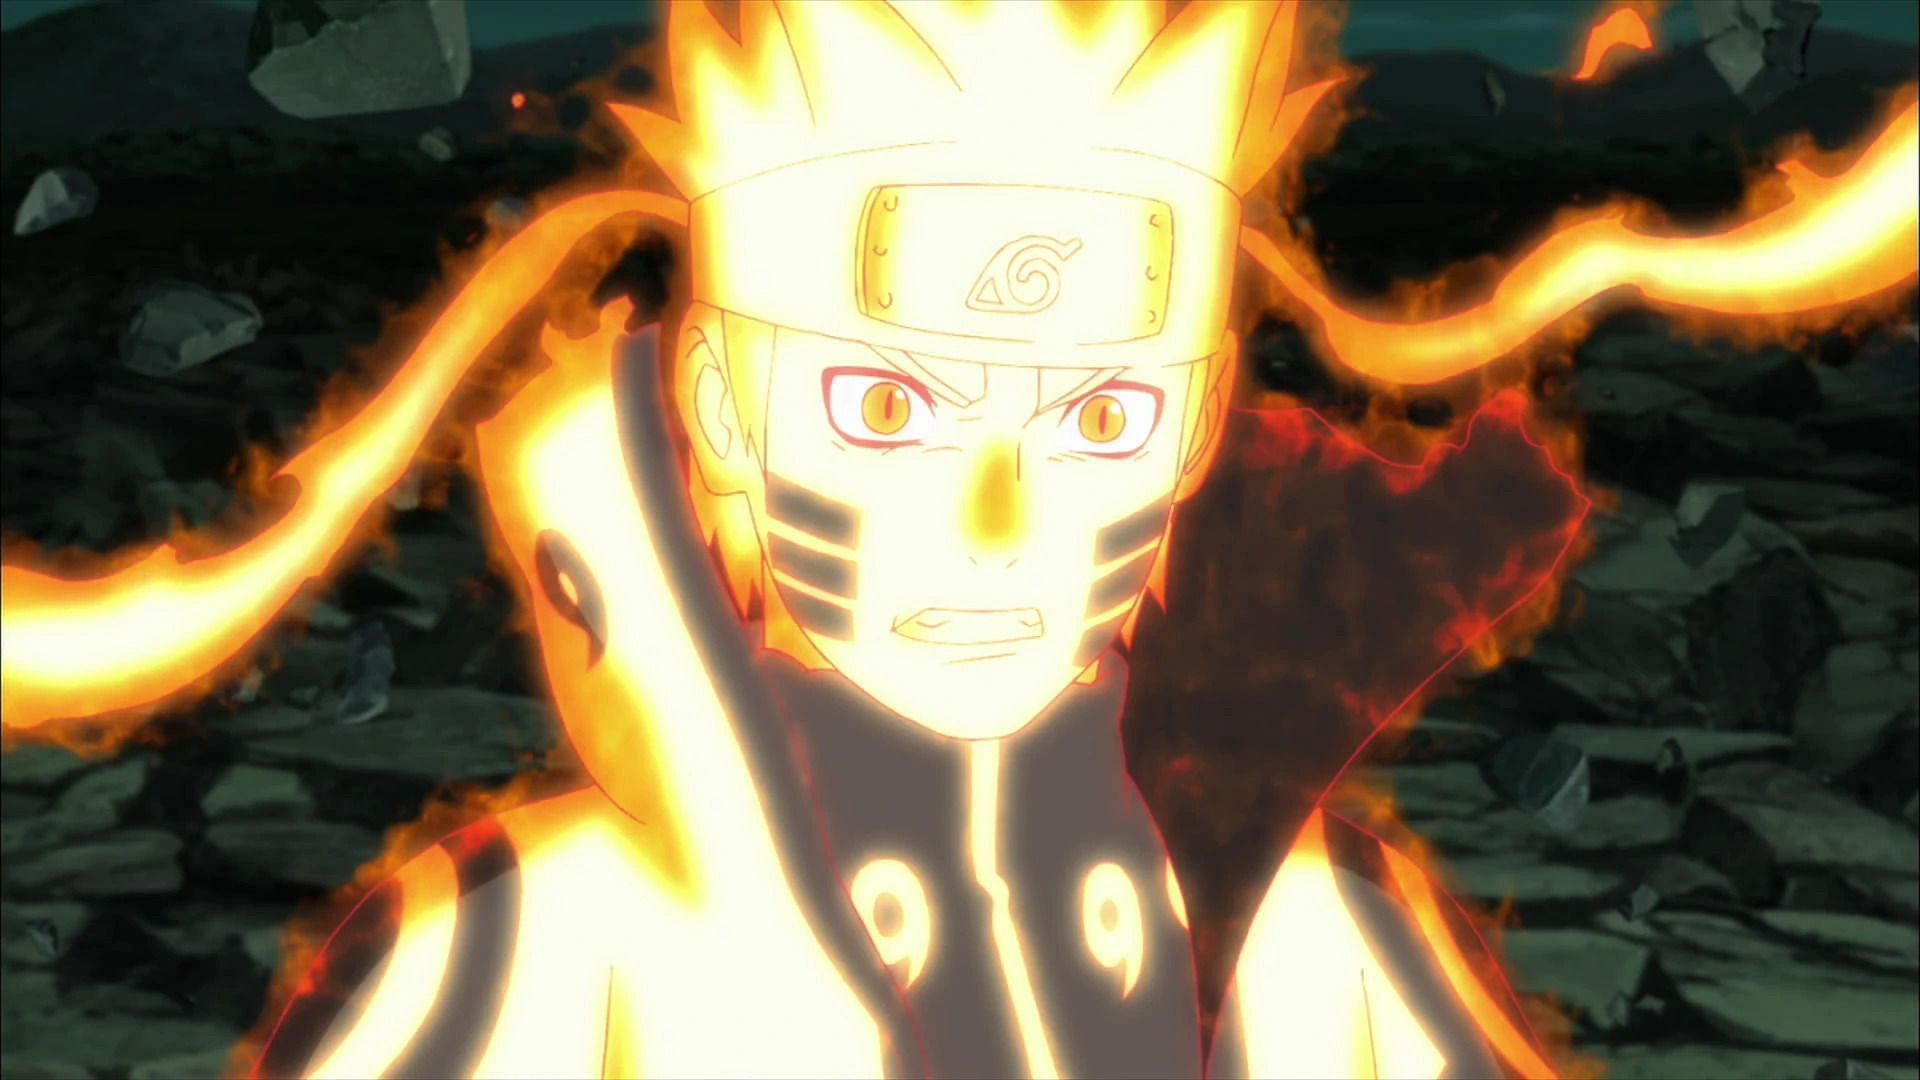 Naruto taught fans to never give up (image via Studio Pierrot)